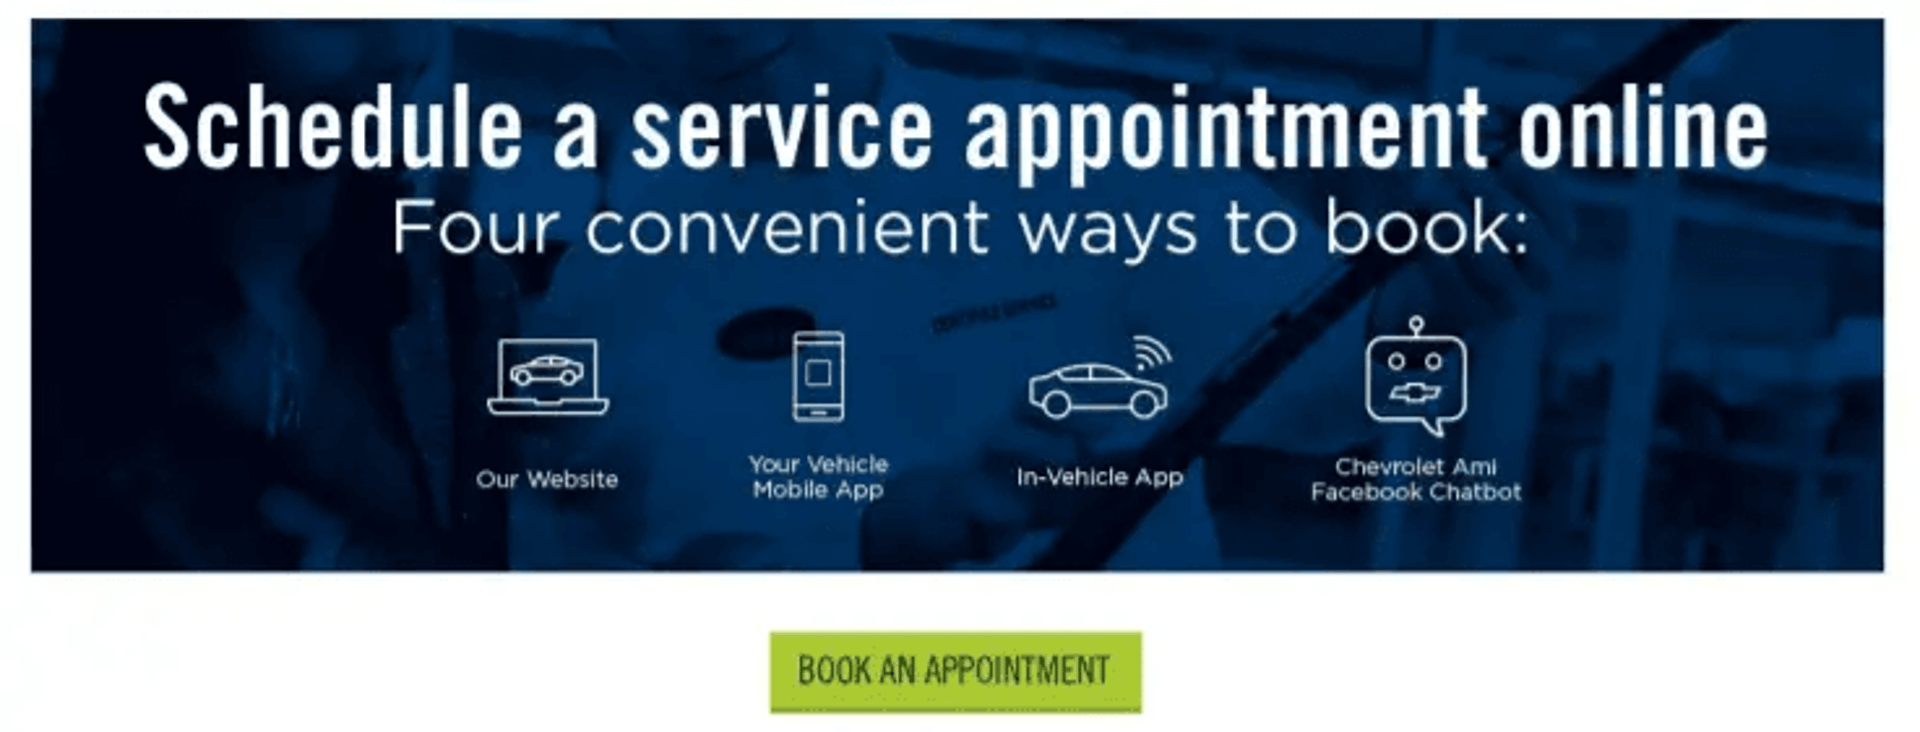 Schedule a Service Appointment Online - Four Convenient Ways to Book: Our website, your vehicle mobile app, in-vehicle app, chevrolet ami facebook chatbot